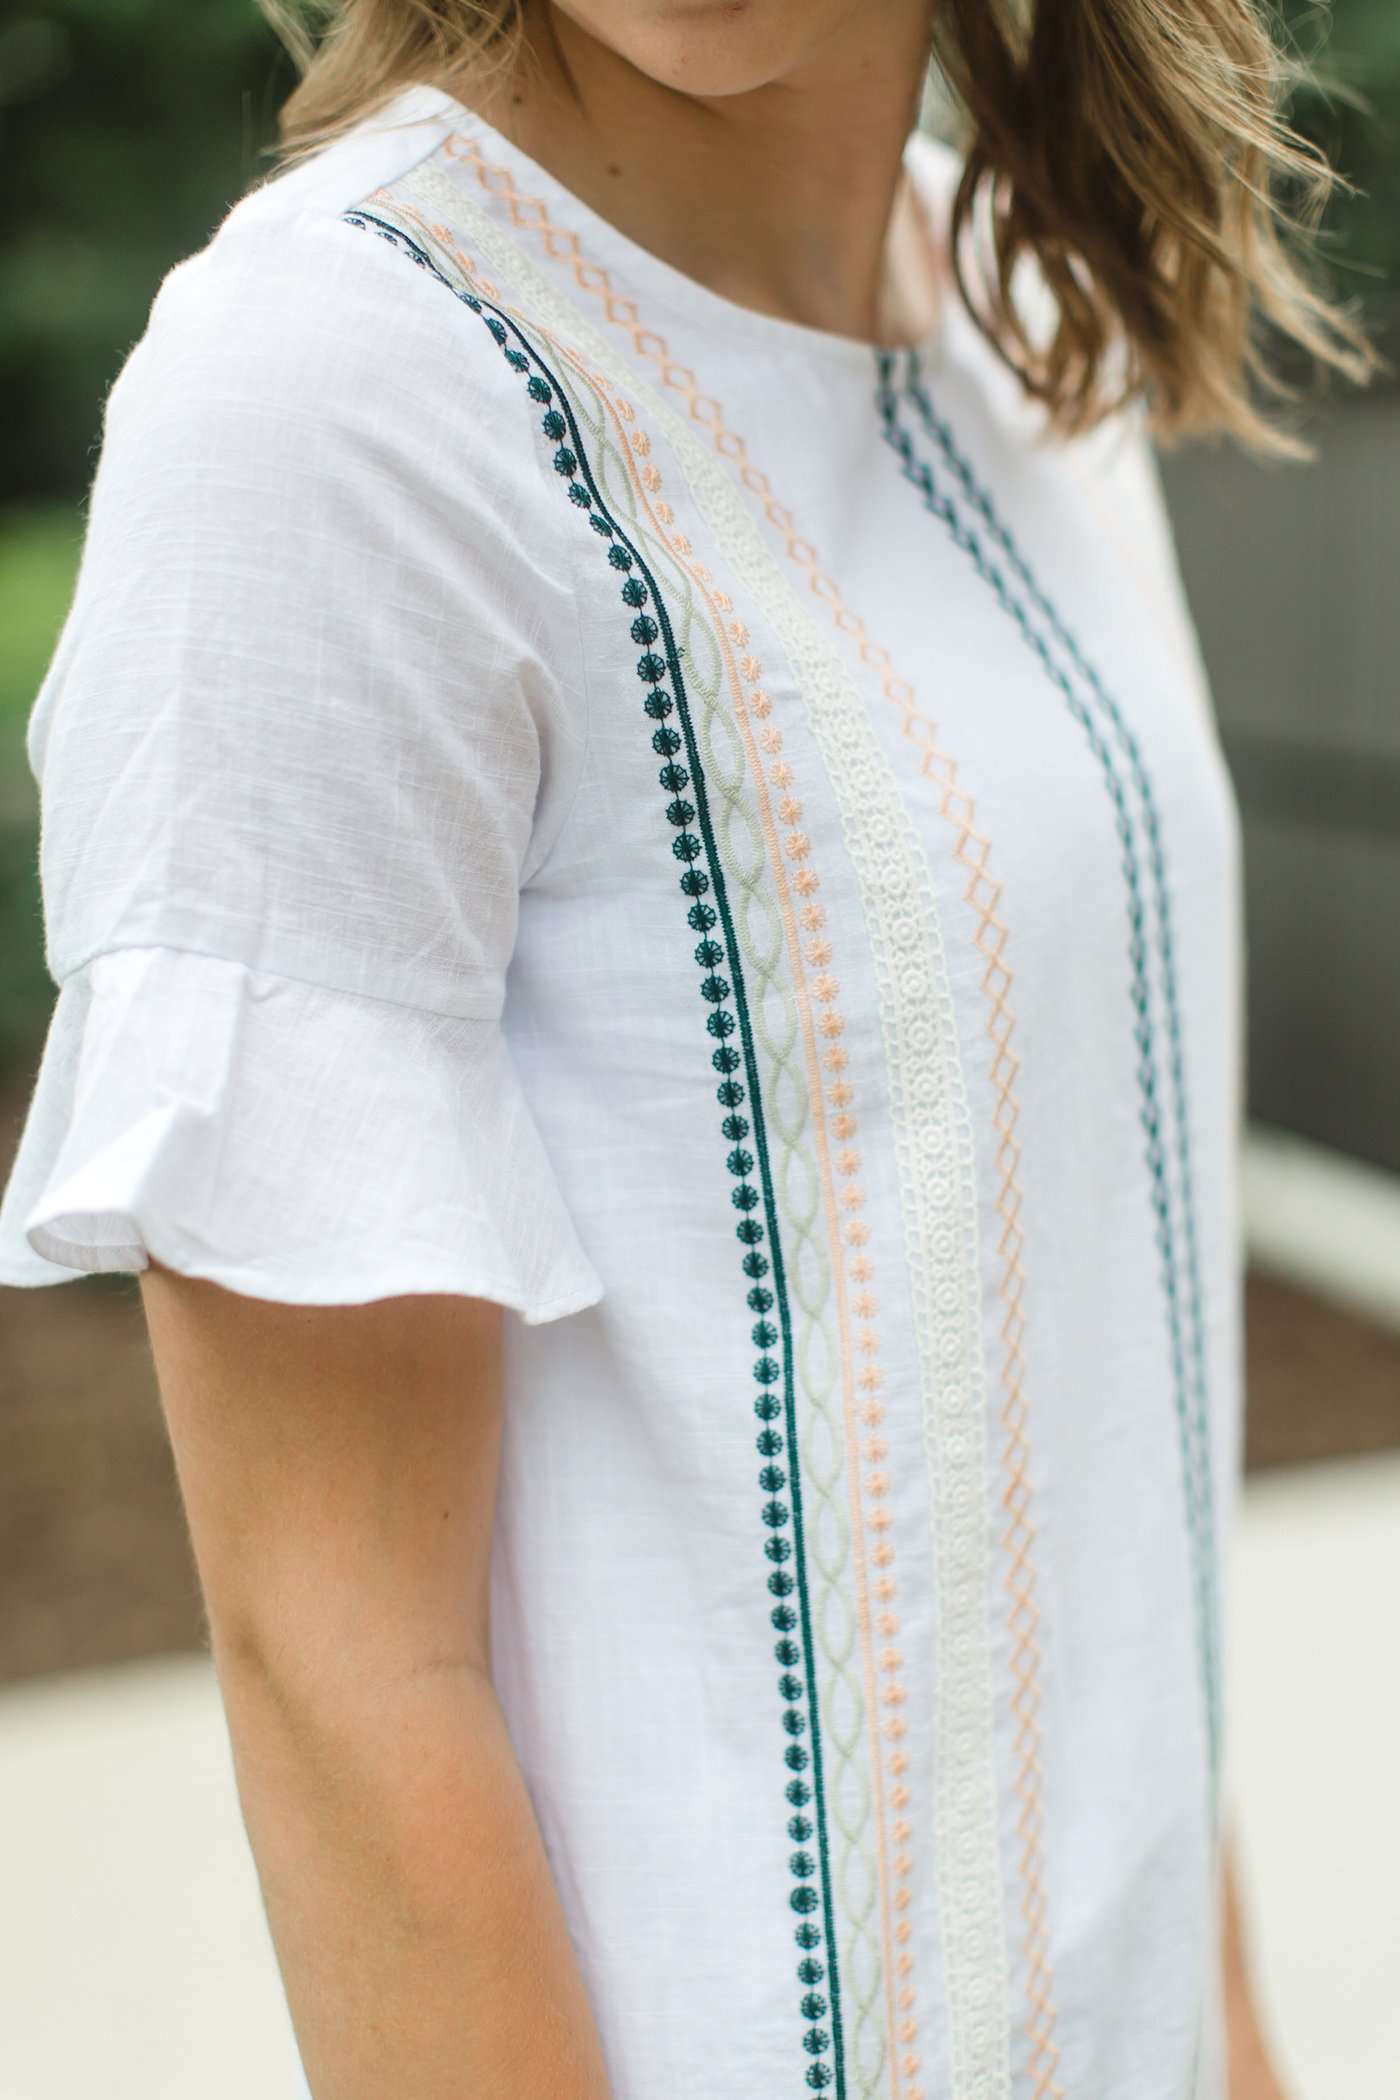 Modest white belle-sleeve top with Earthy colored embroidery down the front.